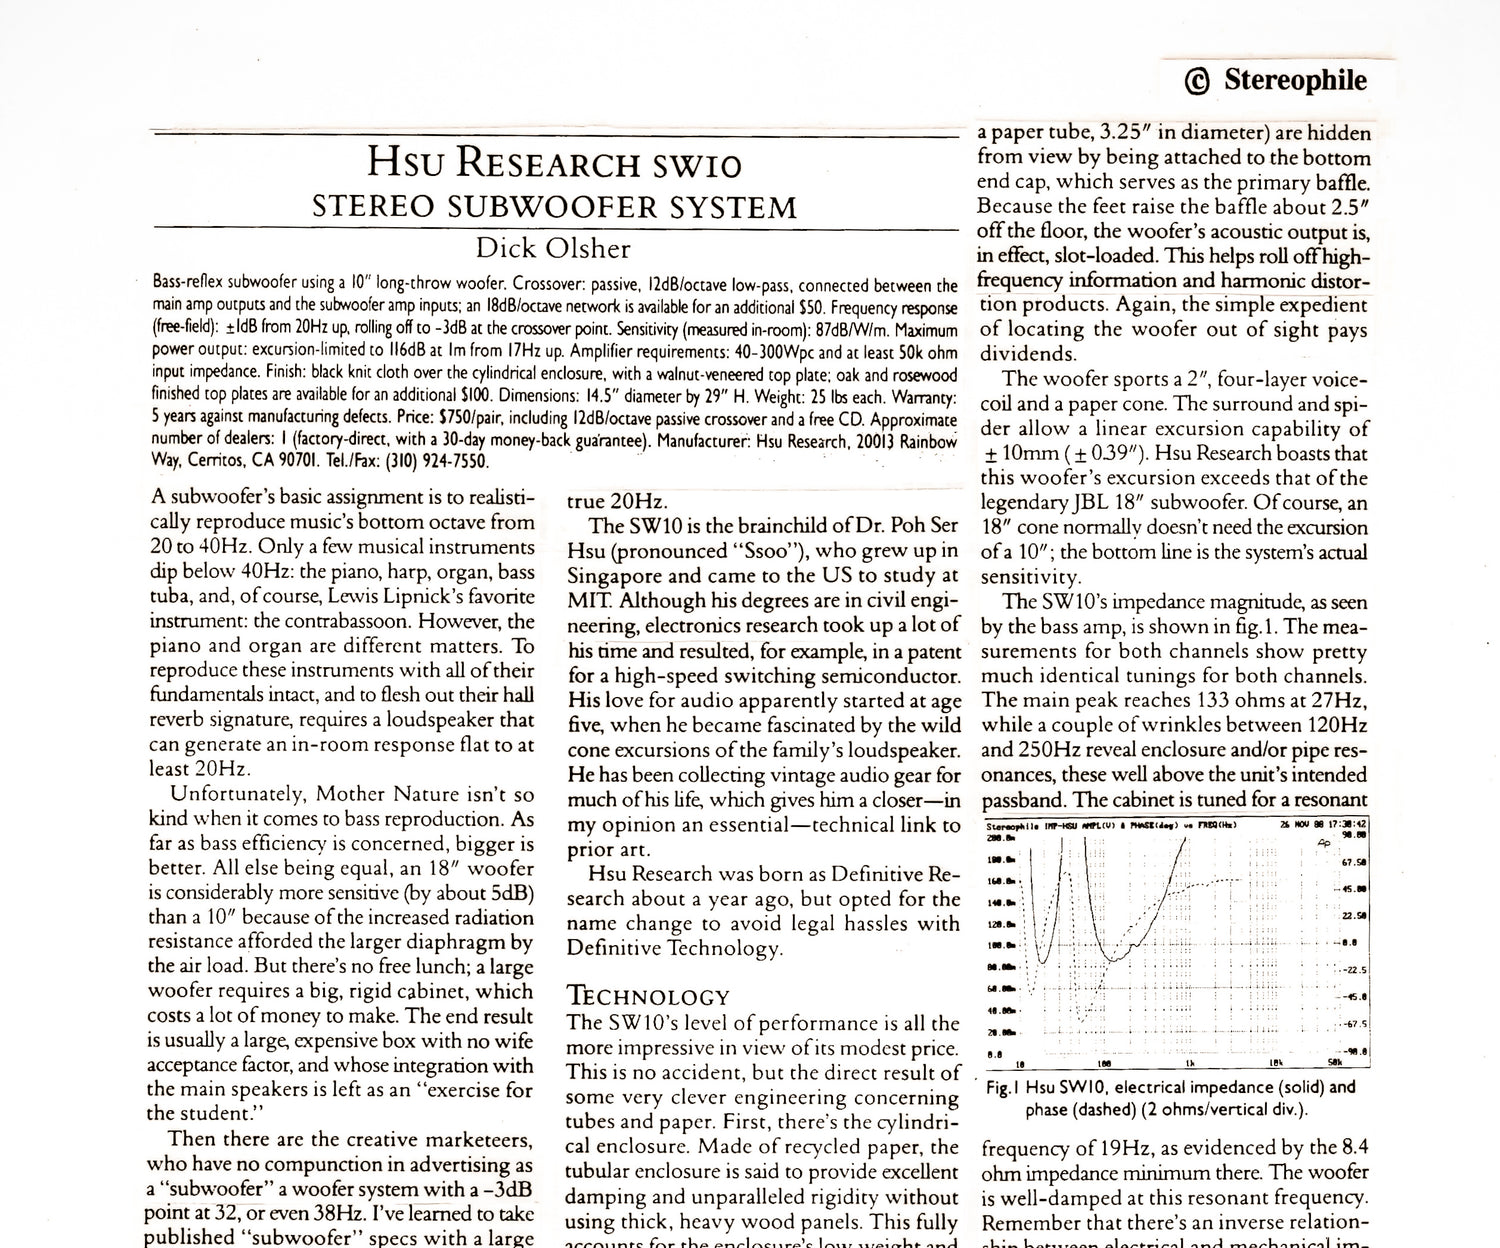 Stereophile 1993: SW10 Stereo System